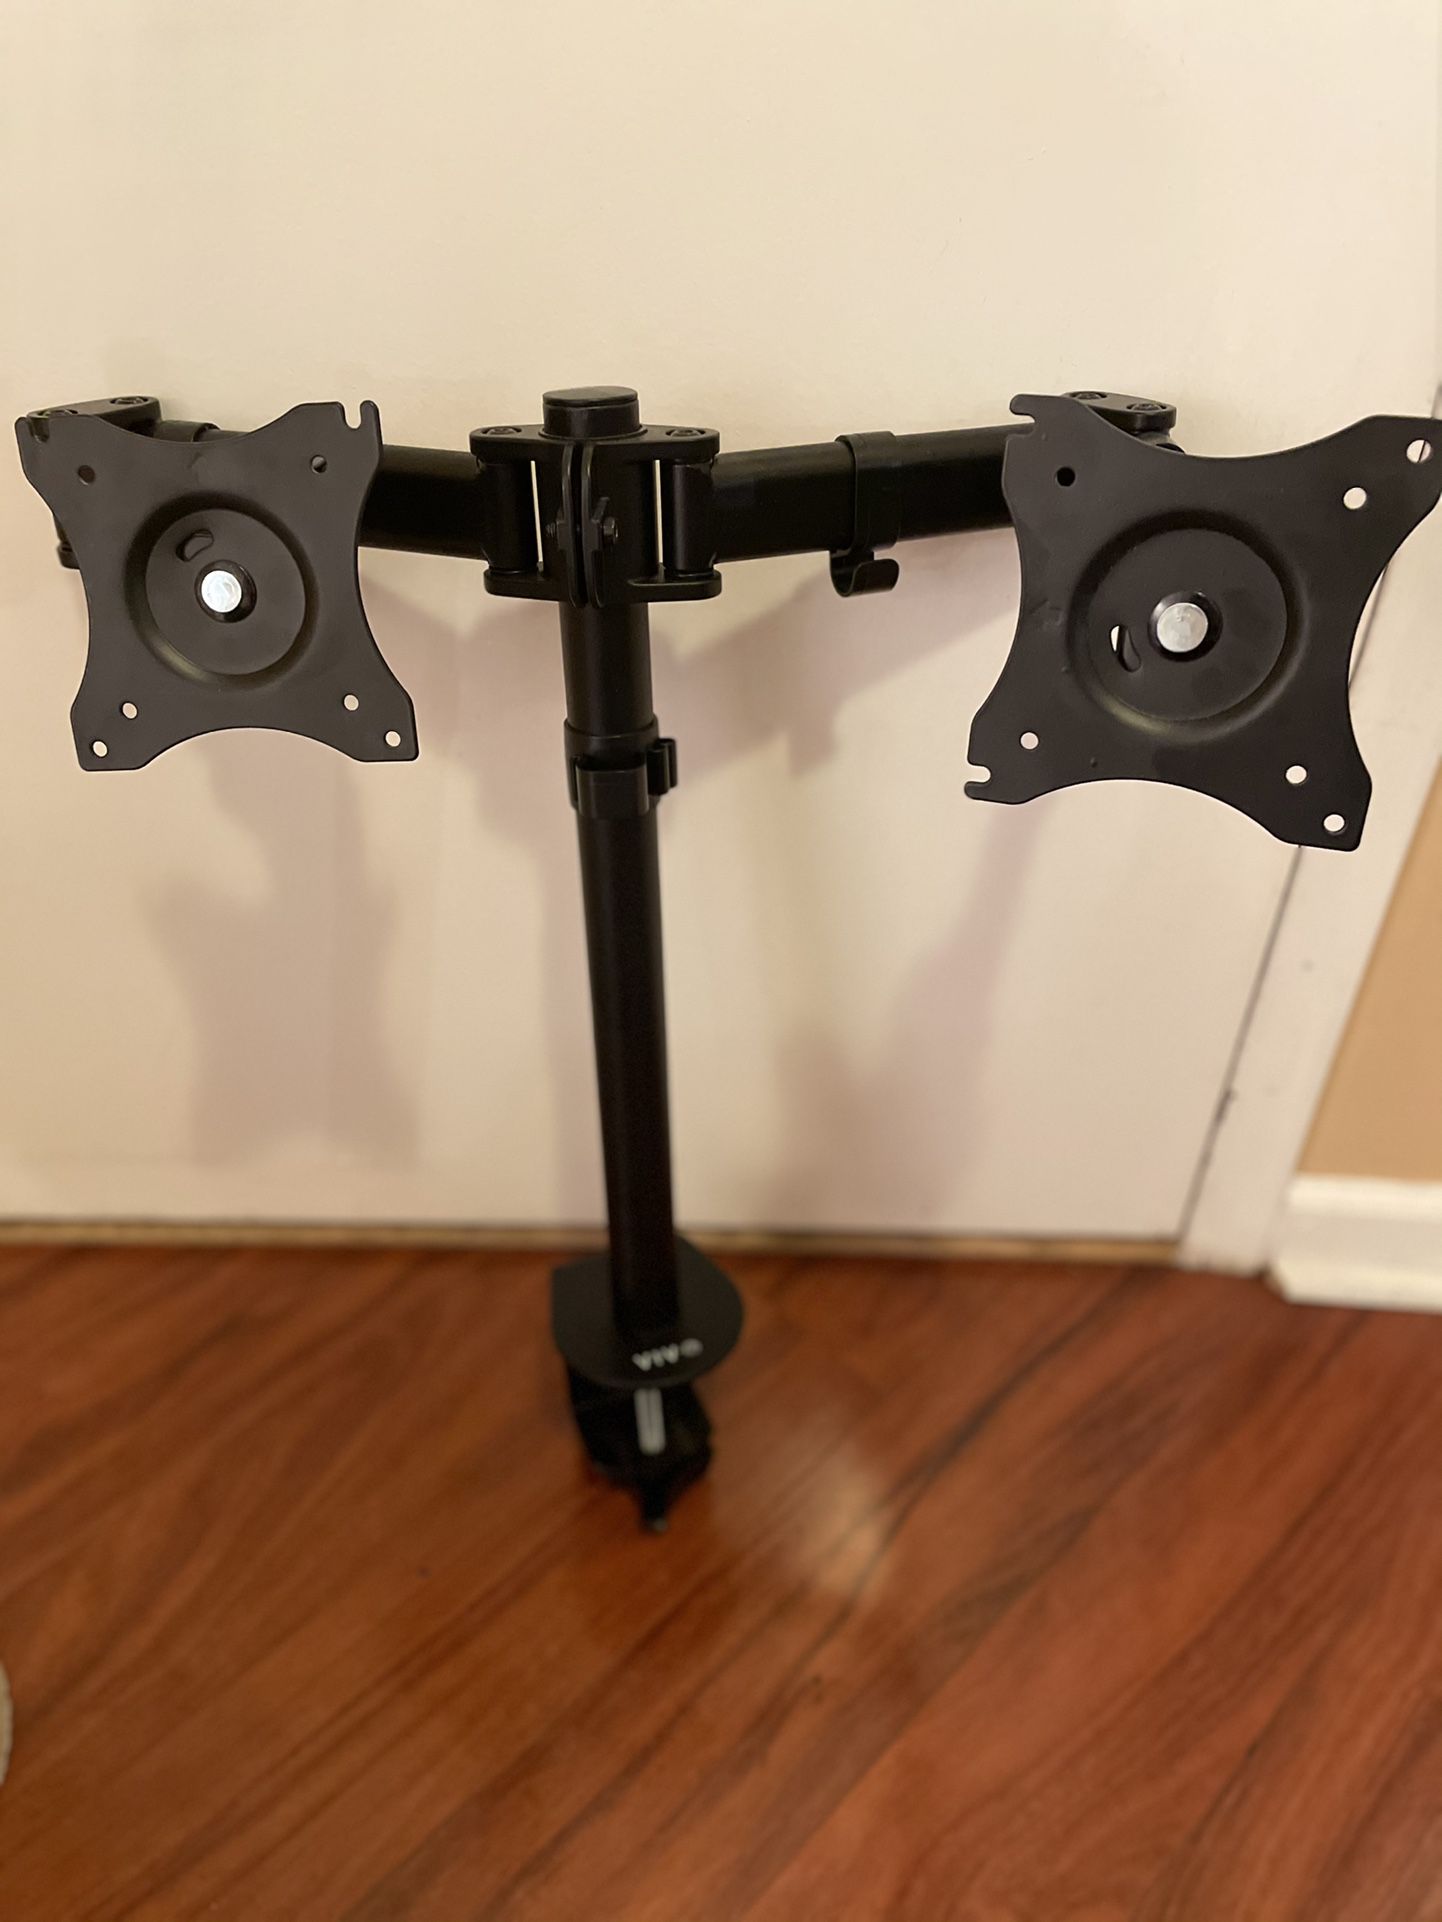 VIVO Dual Monitor Arms Fully Adjustable Desk Mount / Articulating Stand For 2 LCD Screens up to 27"